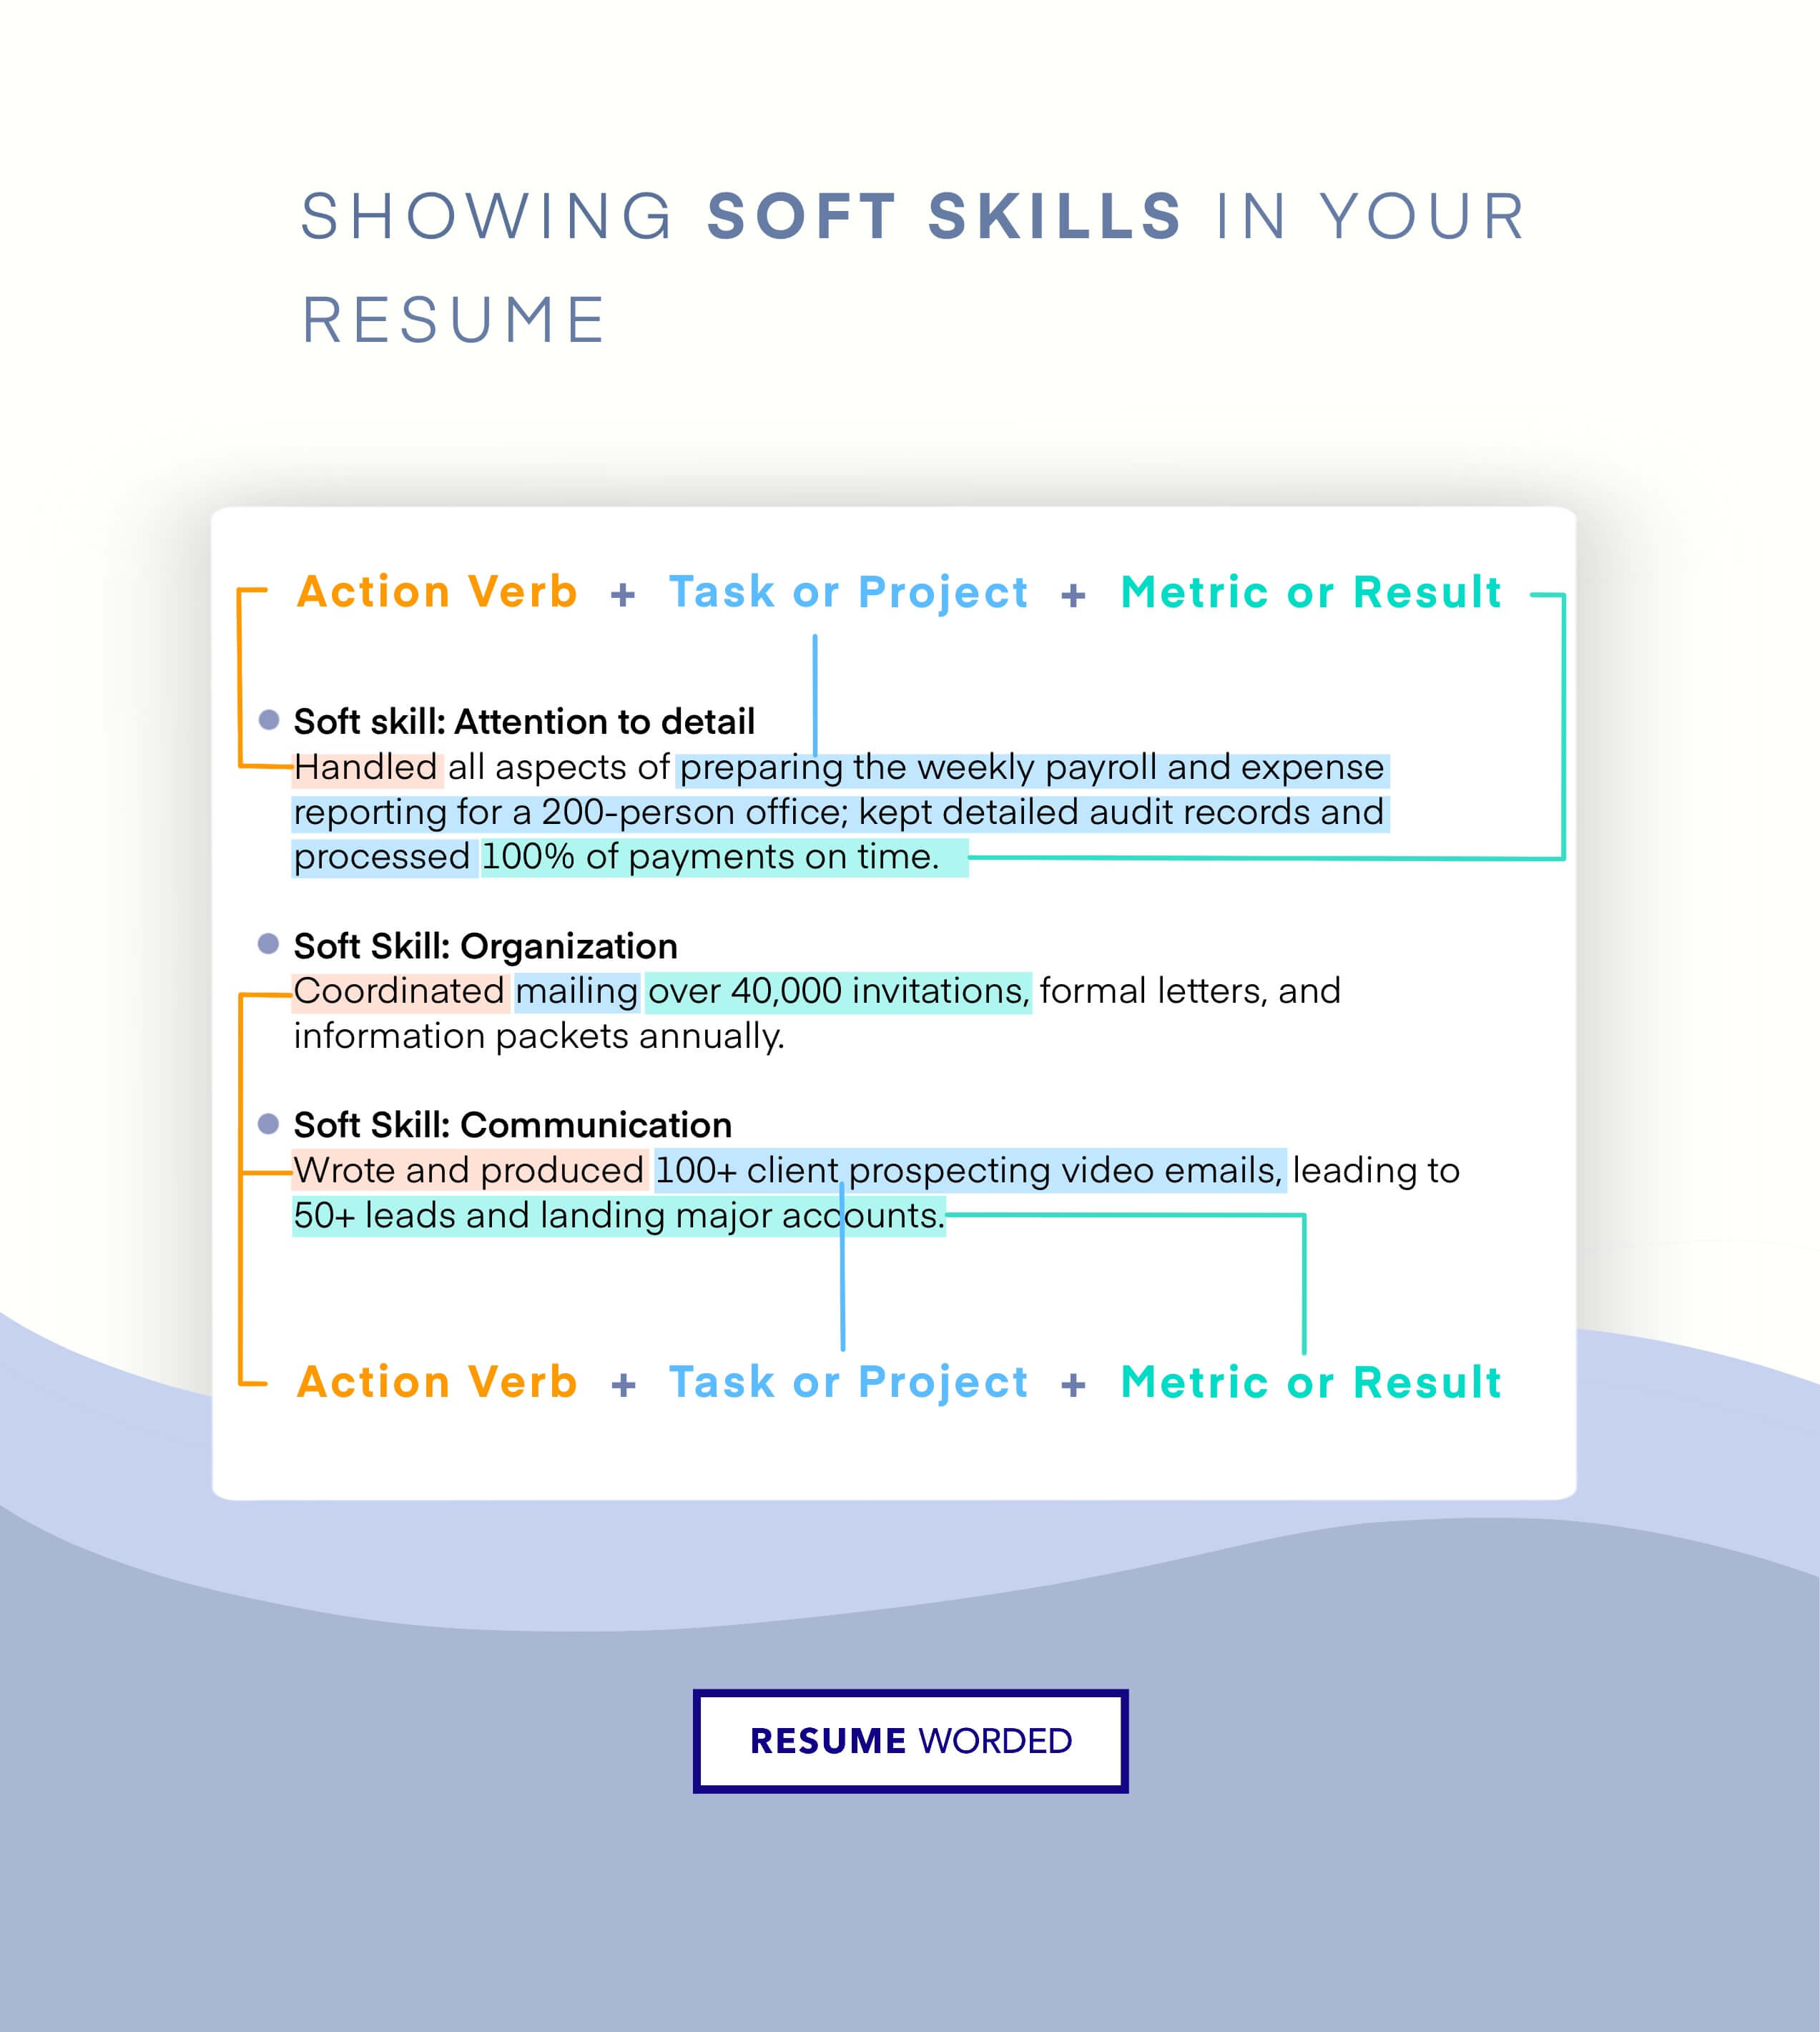 The structure of your bullet points when showing soft skills like being a fast learner